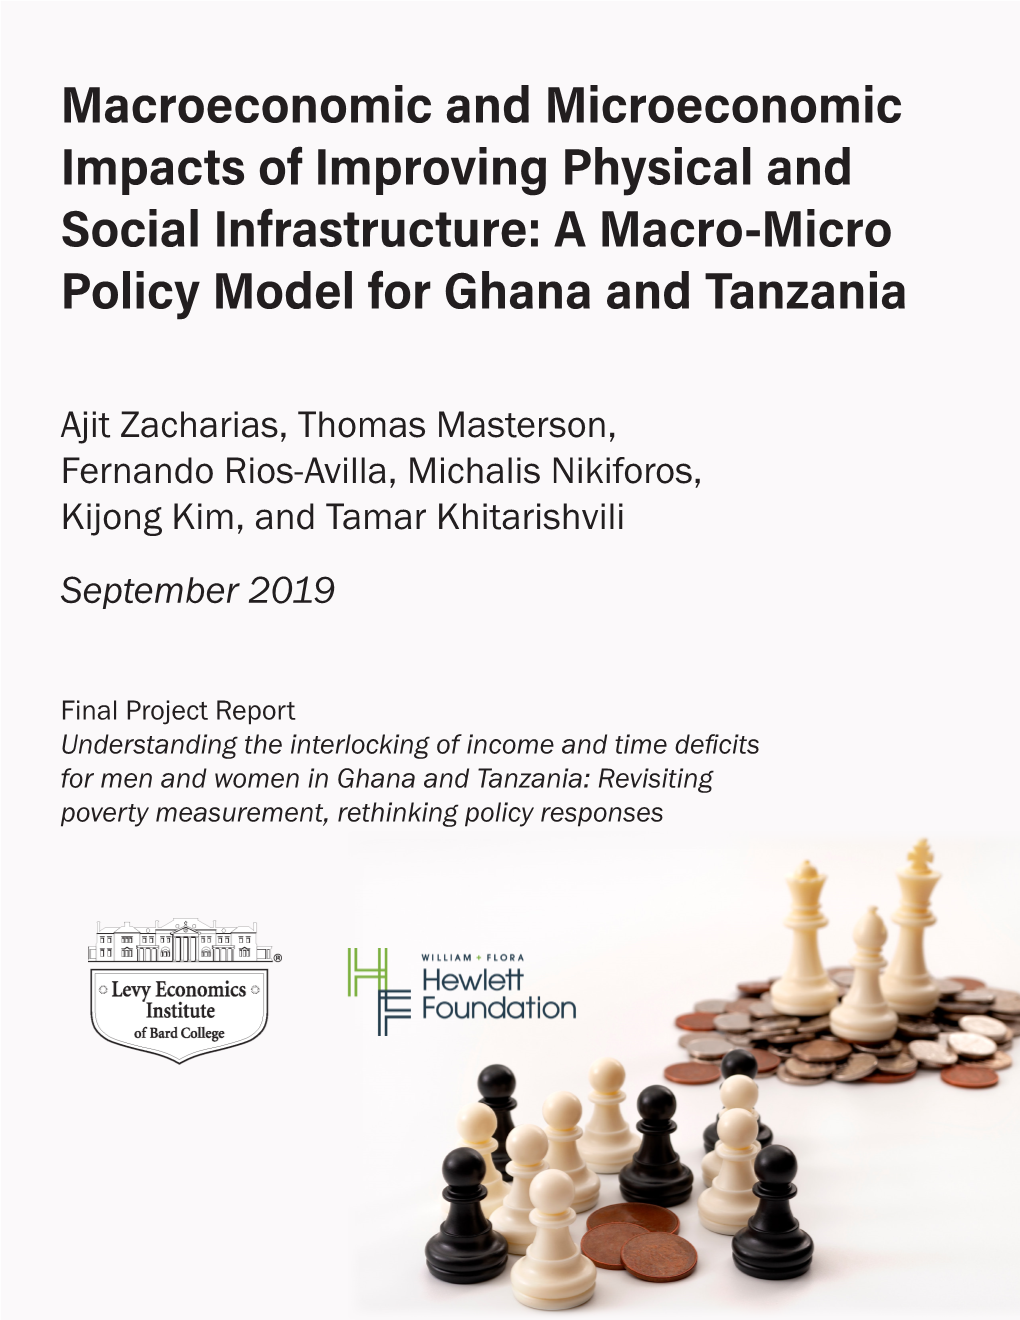 Macroeconomic and Microeconomic Impacts of Improving Physical and Social Infrastructure: a Macro-Micro Policy Model for Ghana and Tanzania